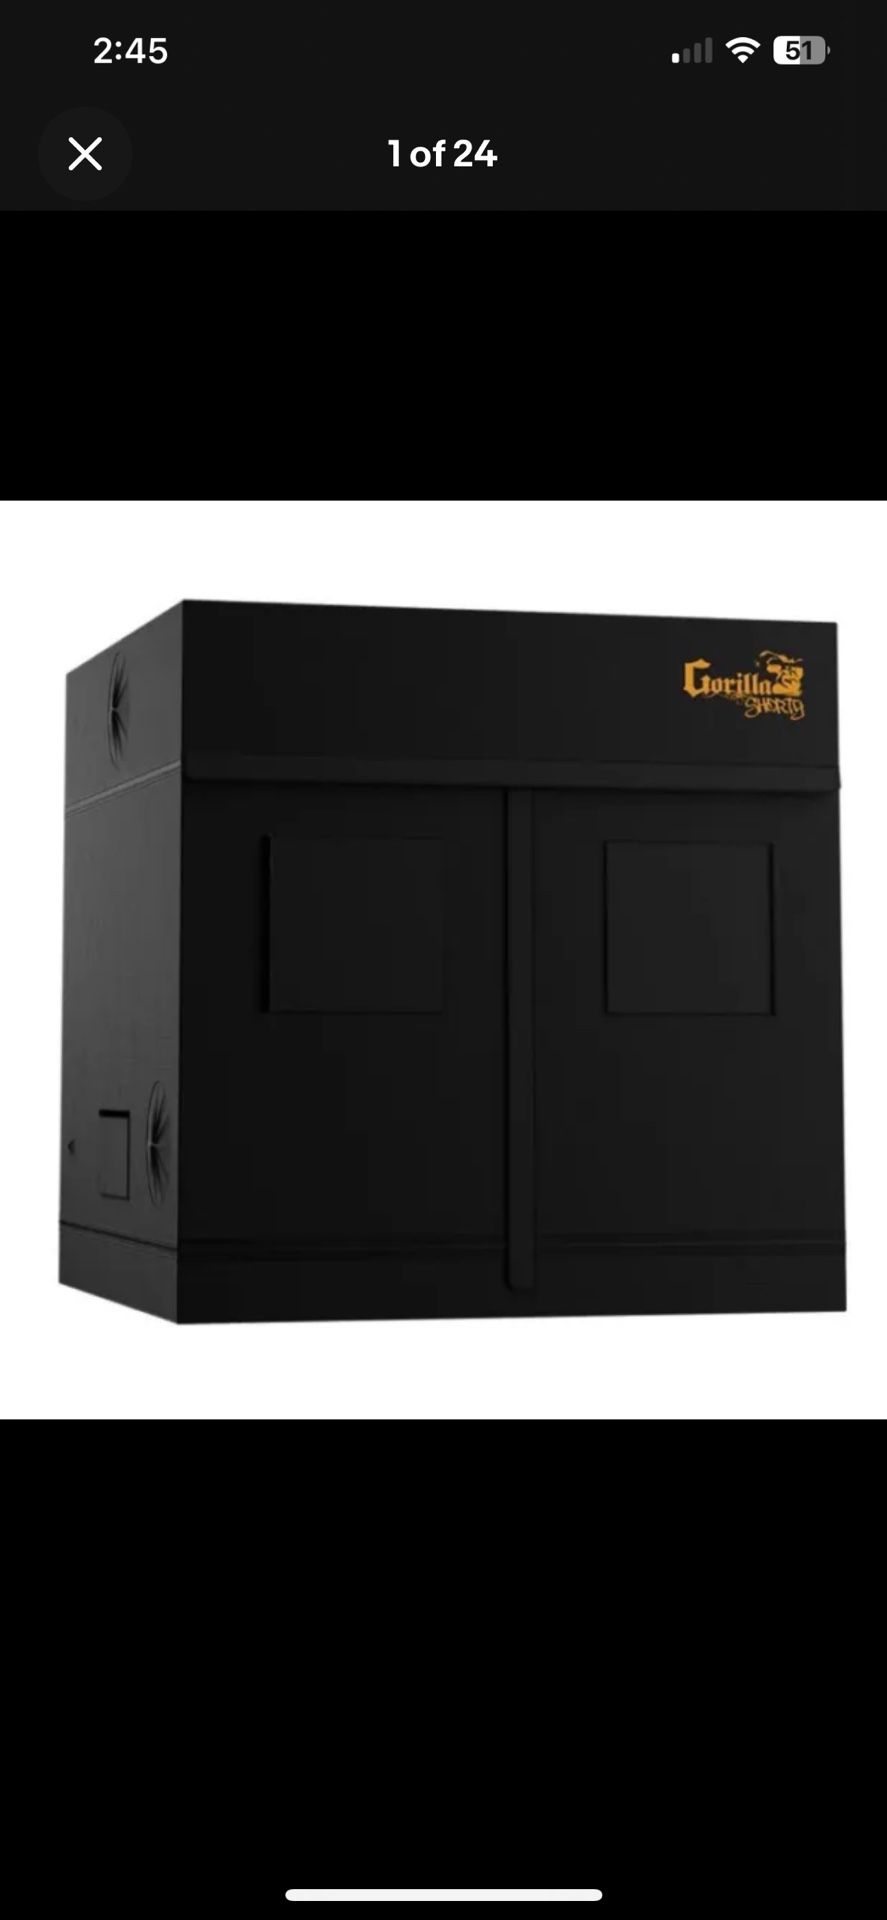 2 New Gorilla Grow Tent 5x5 Shorty 25% Discount for both